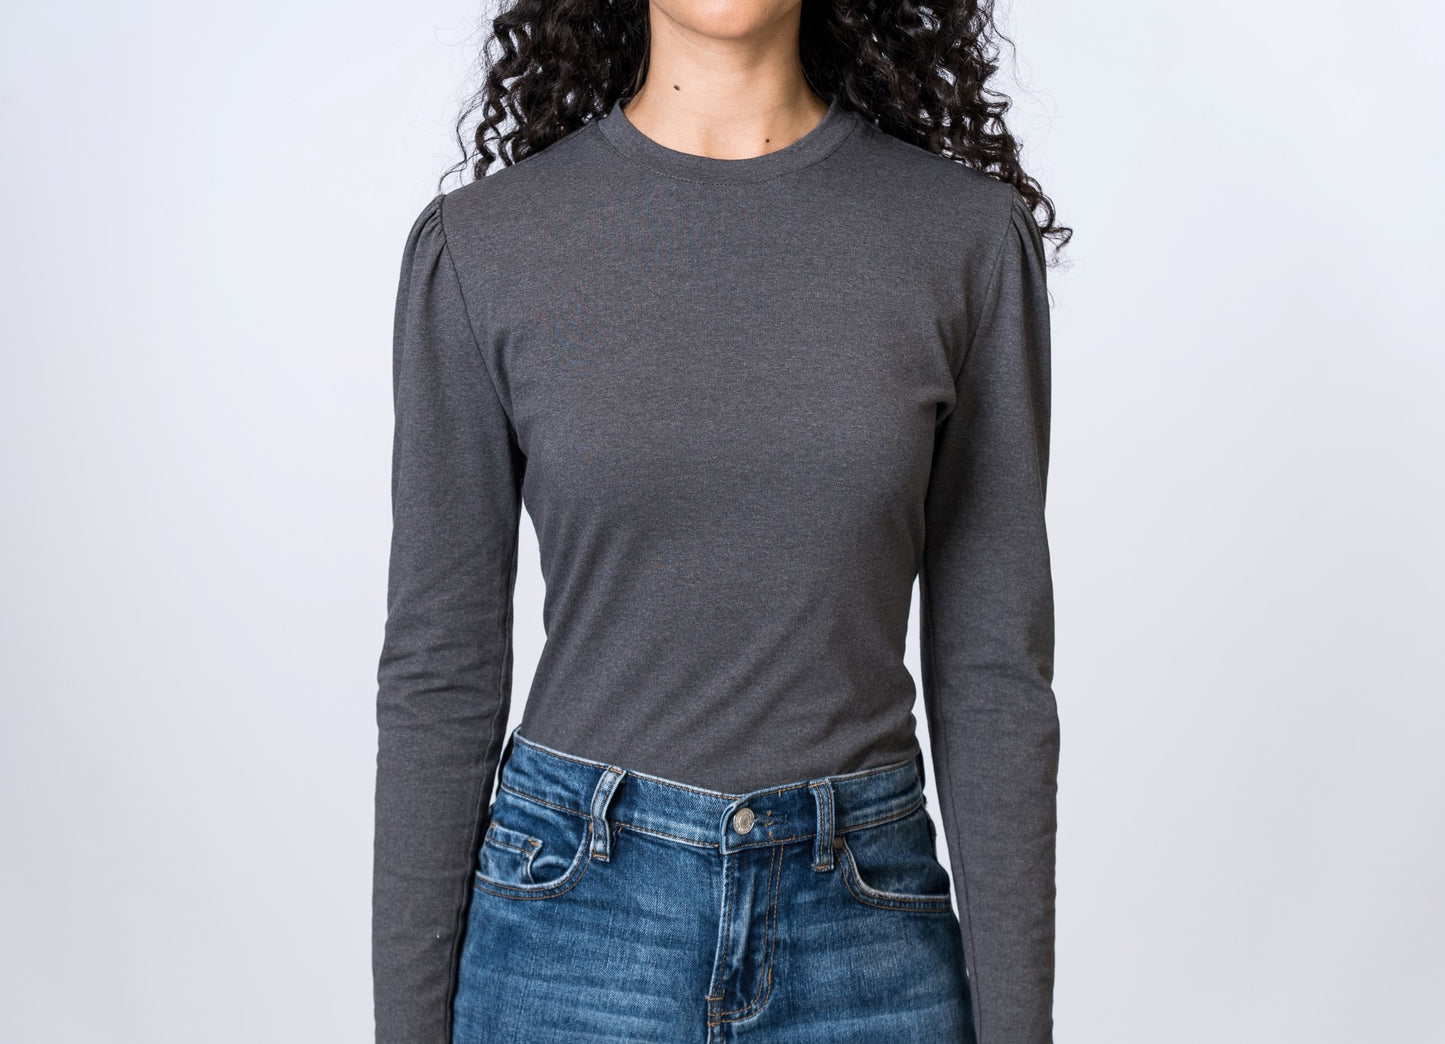 Woman wearing a gray, long sleeve top with puff sleeves and medium wash jeans. Front of clothing is being shown